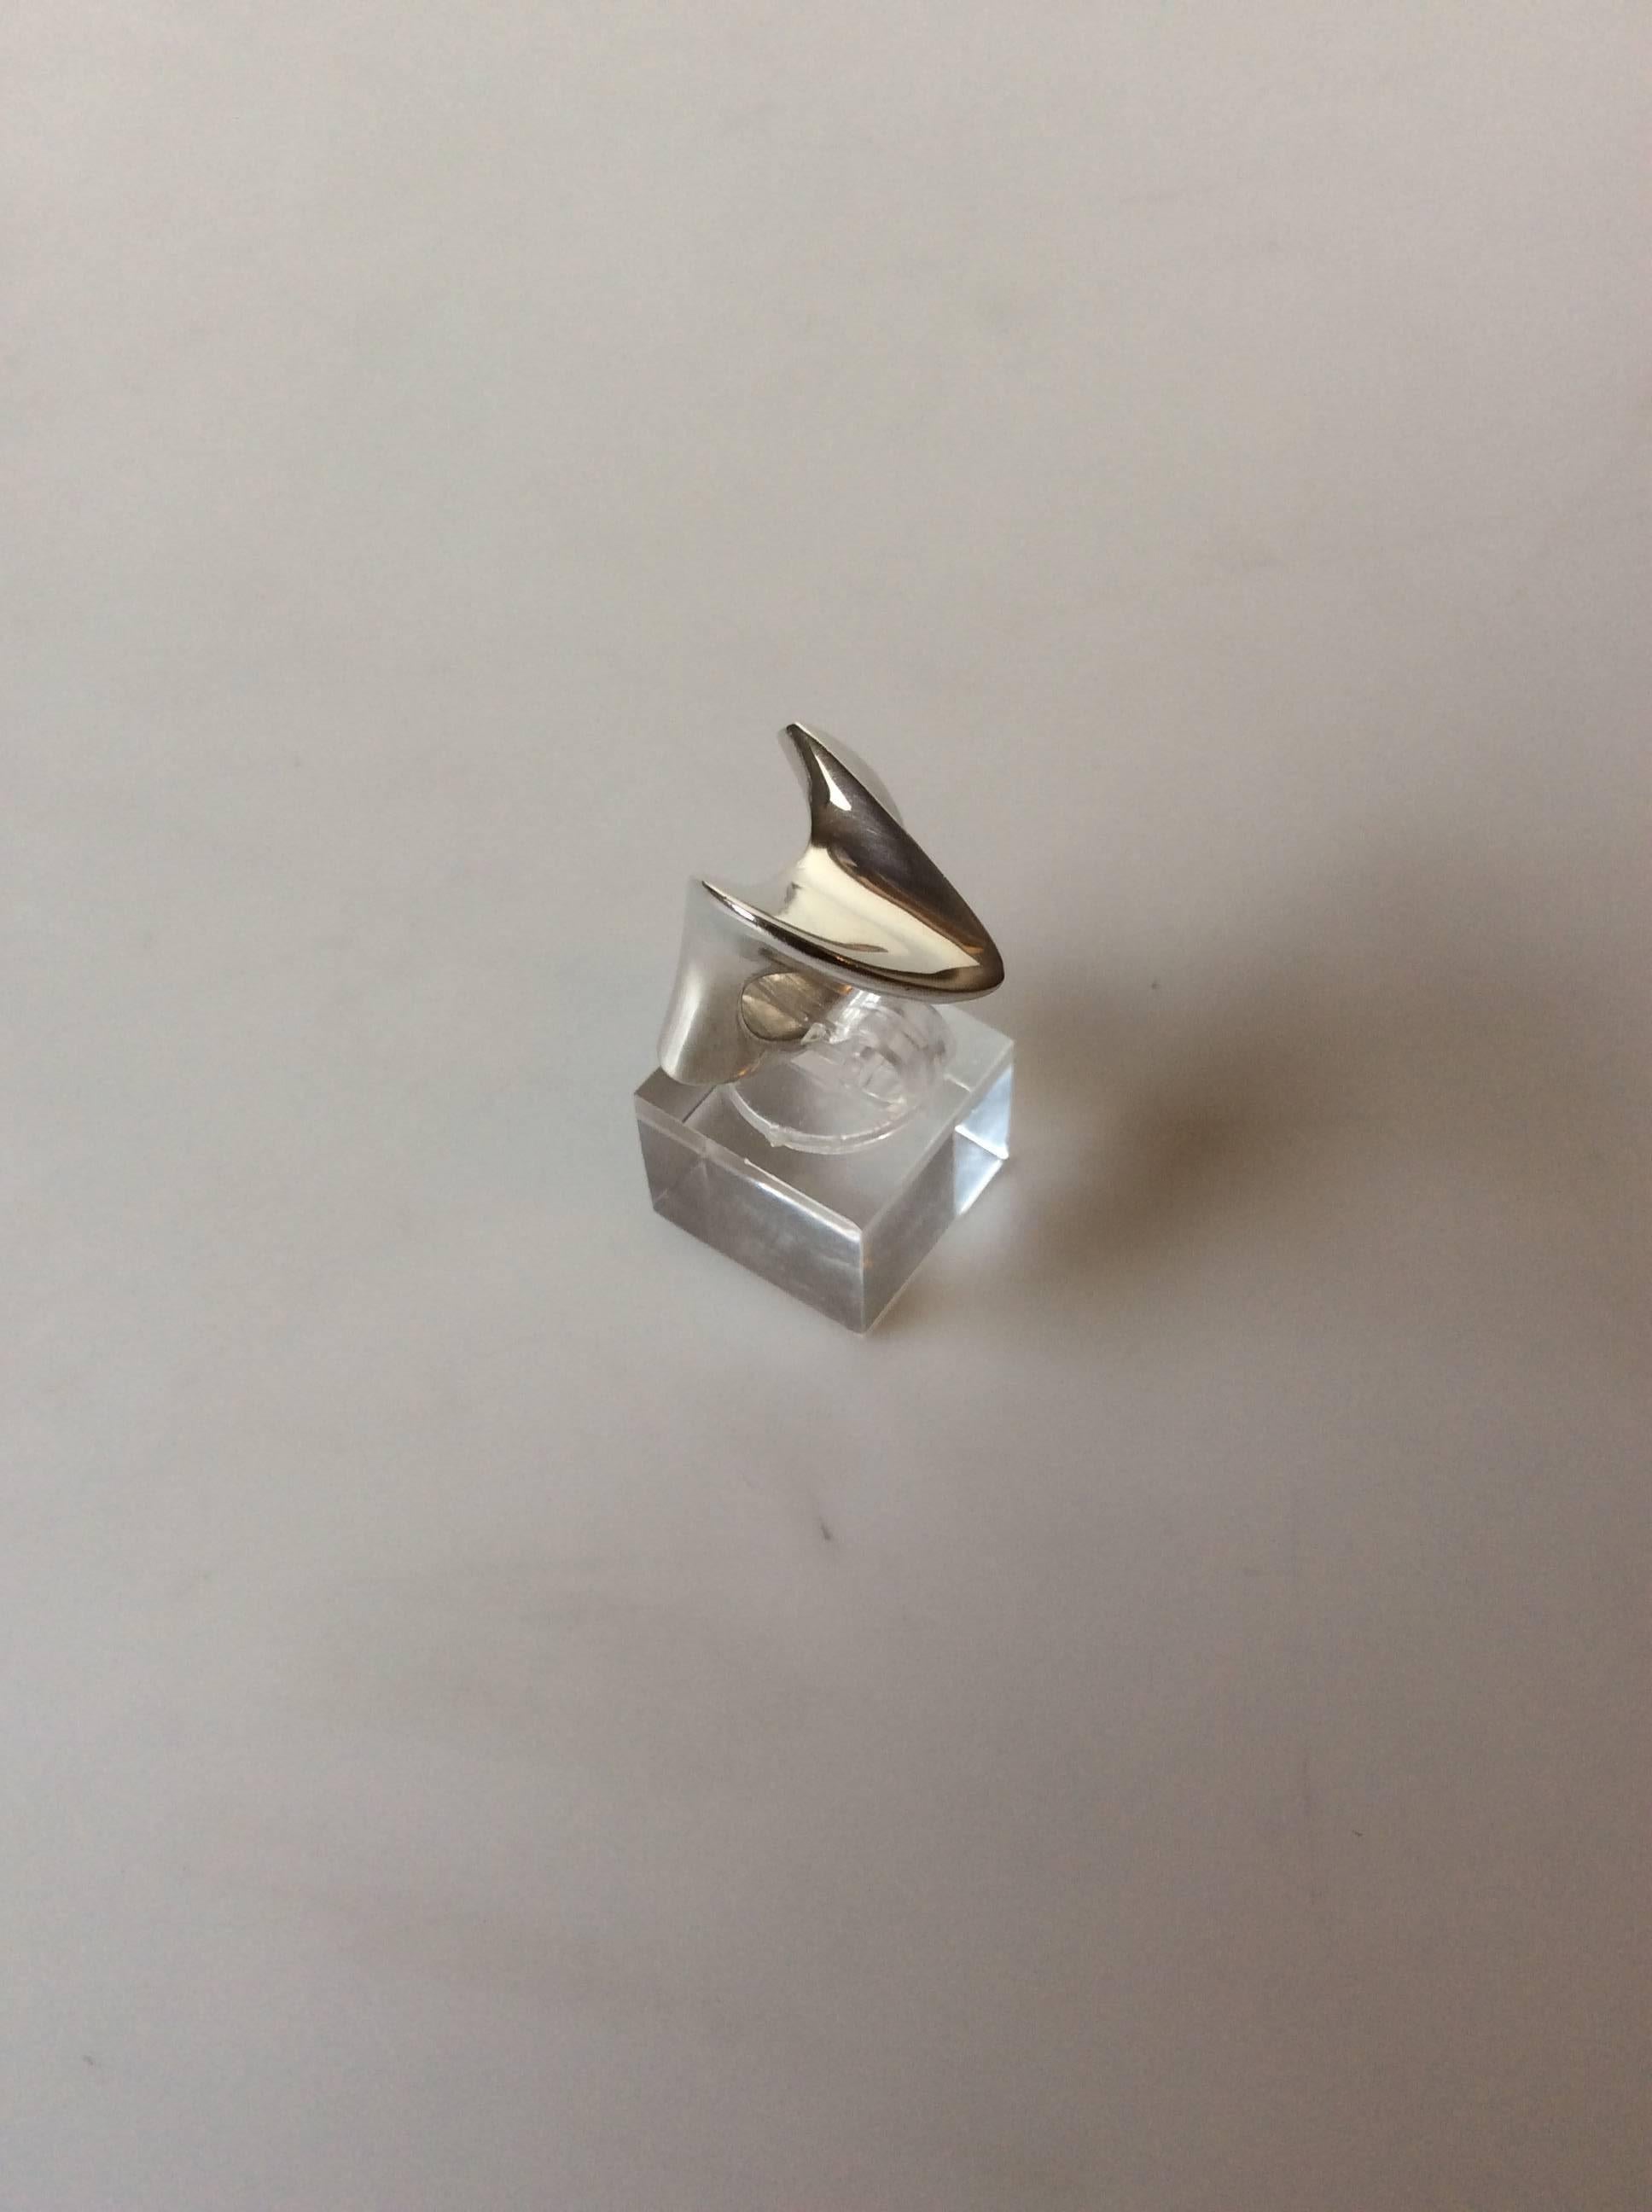 Hans Hansen Sterling Silver Ring.

Ring size 49 or US 5

Weight is 15,04 grams / 0.531 oz.